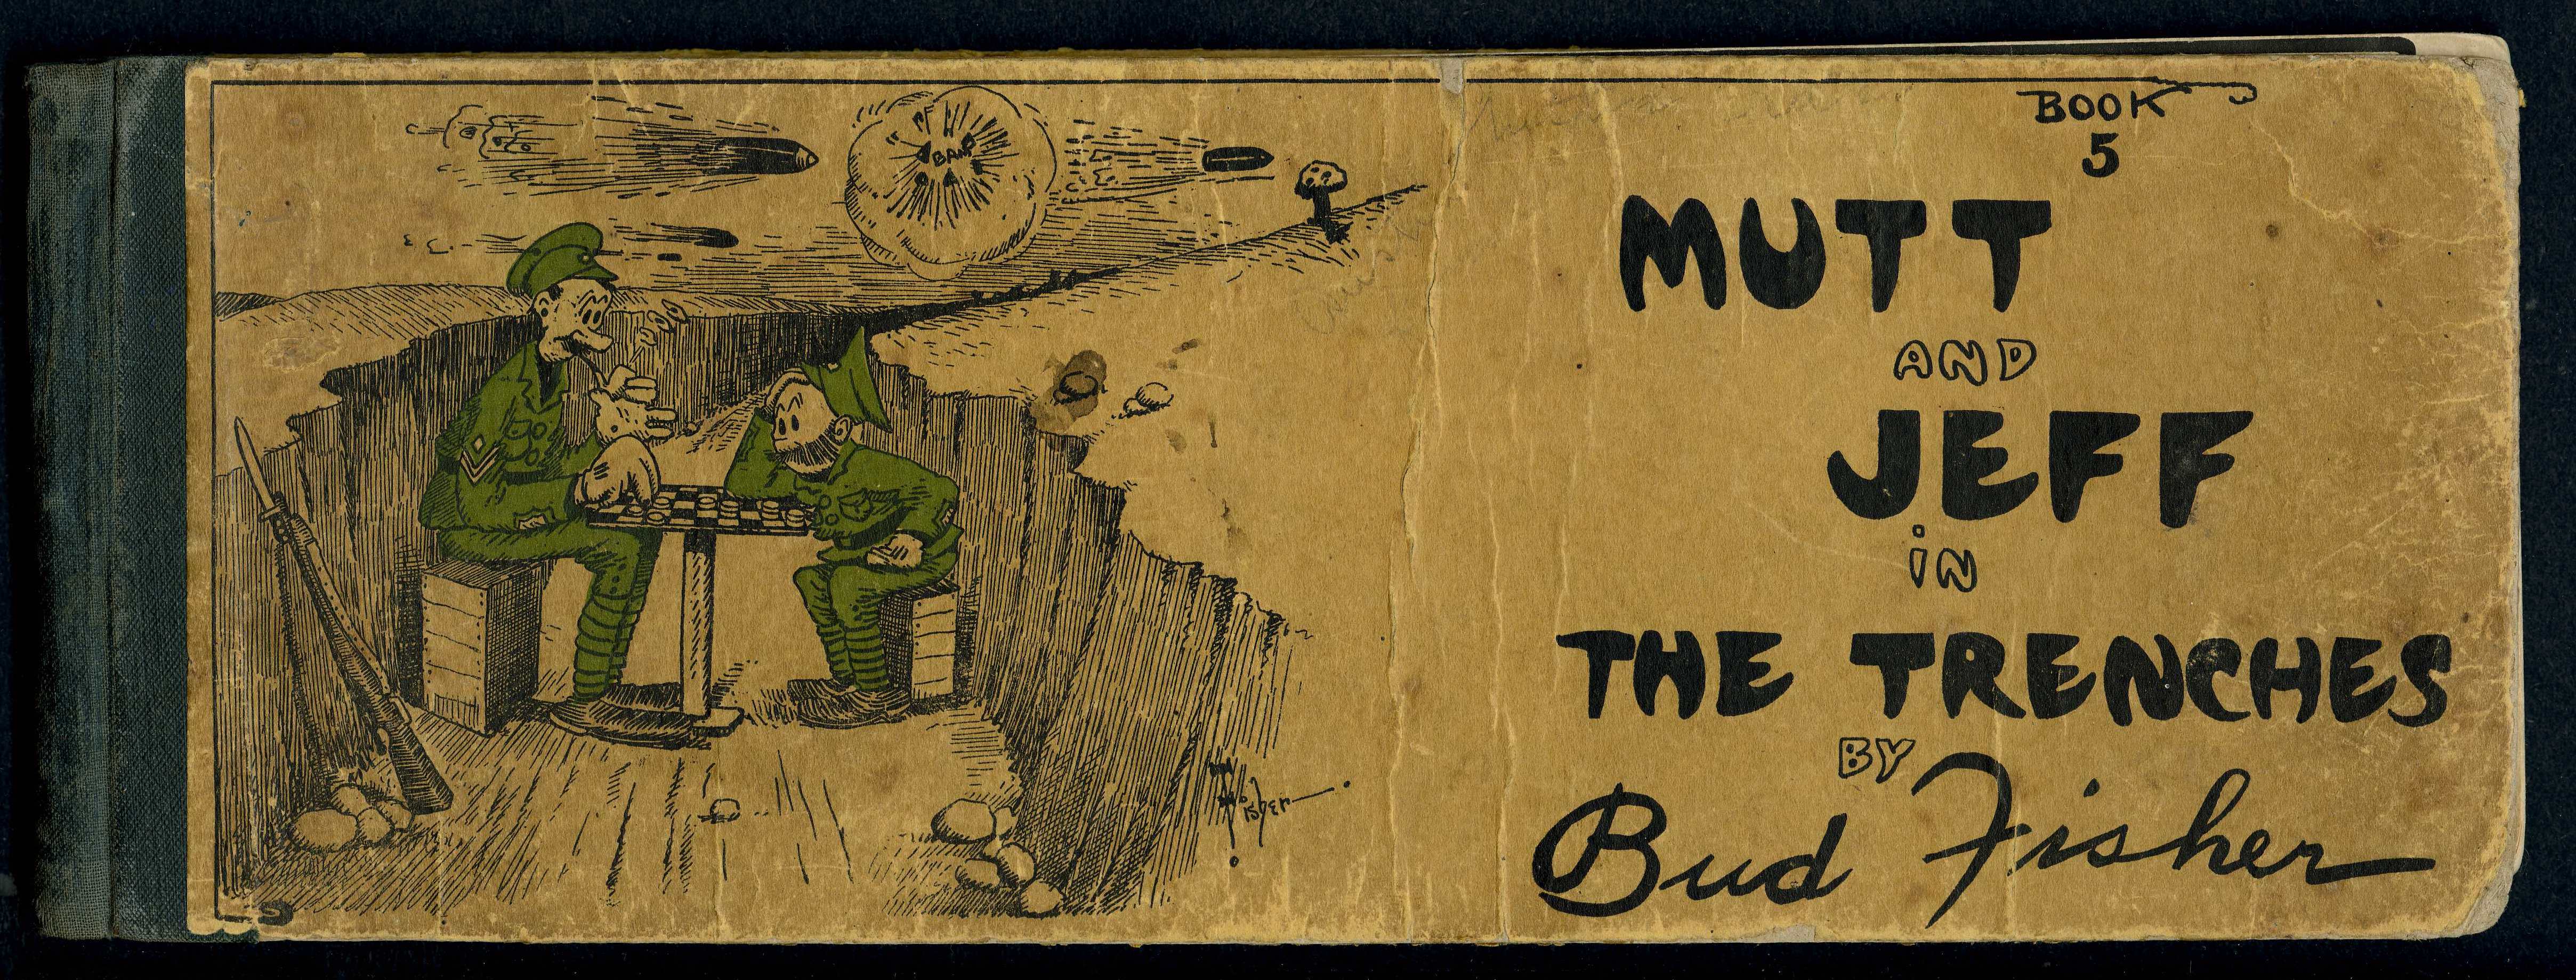 Mutt and Jeff in the Trenches (1916)